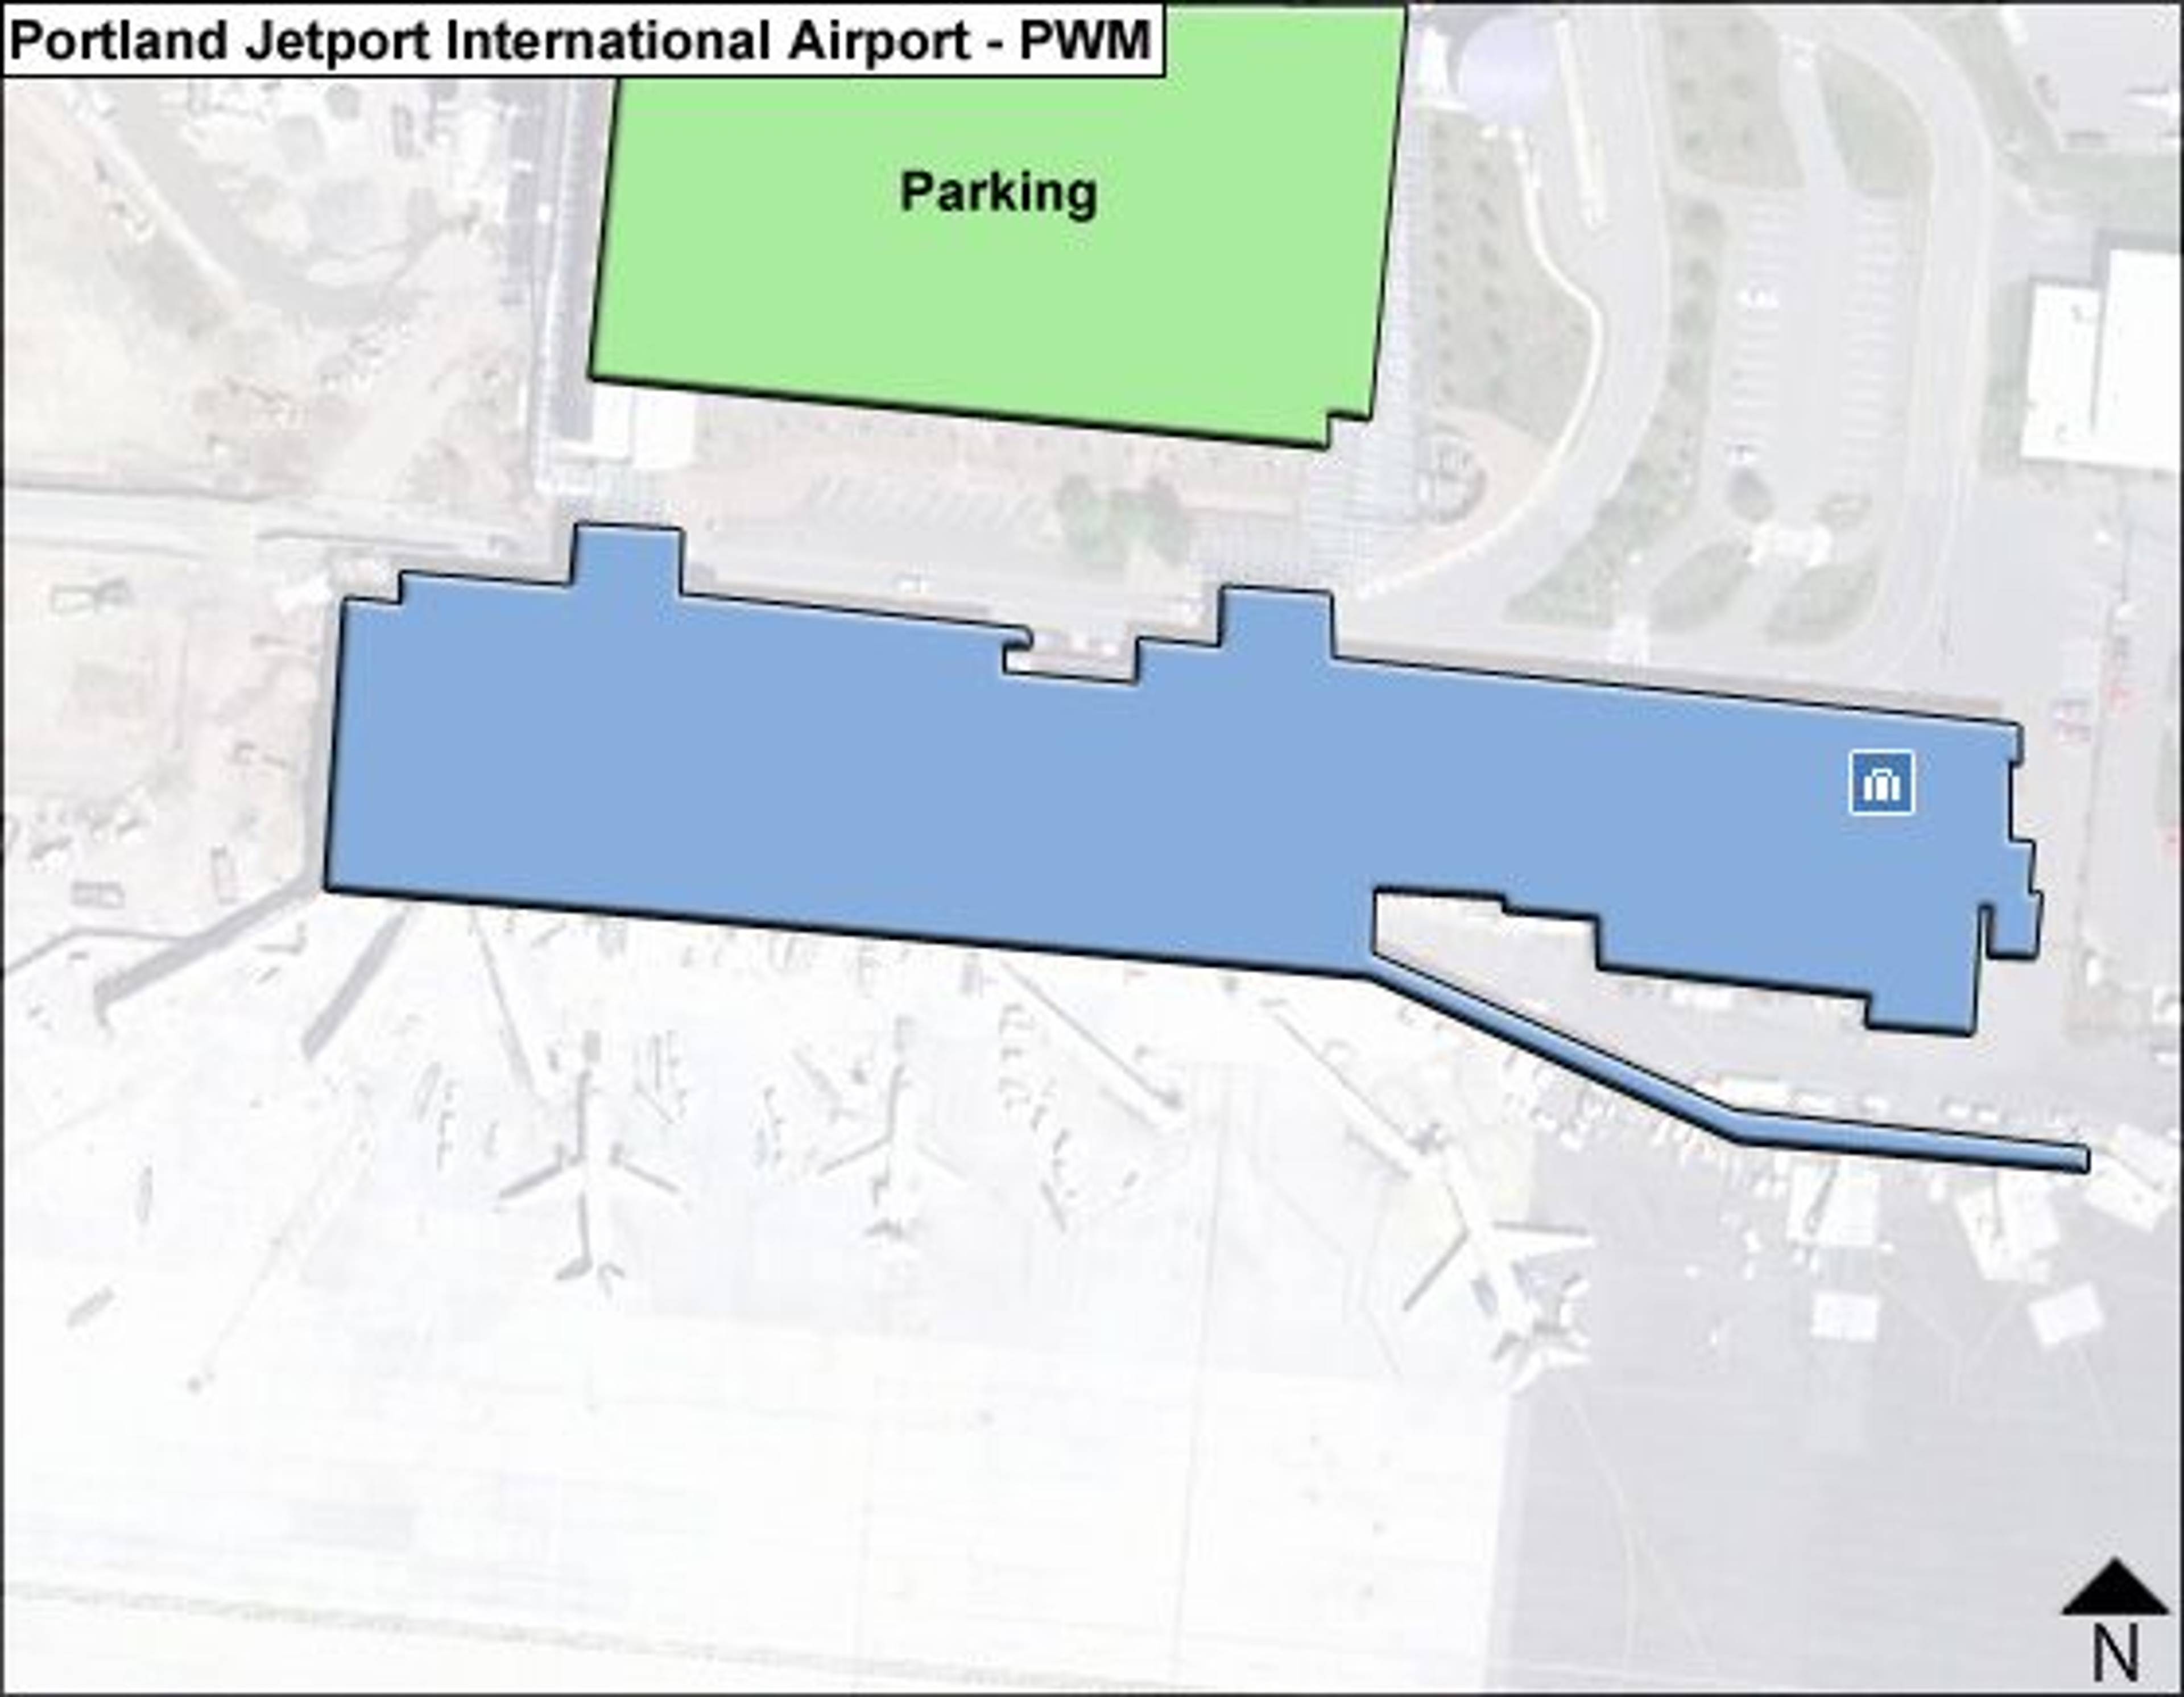 PWM Overview Map